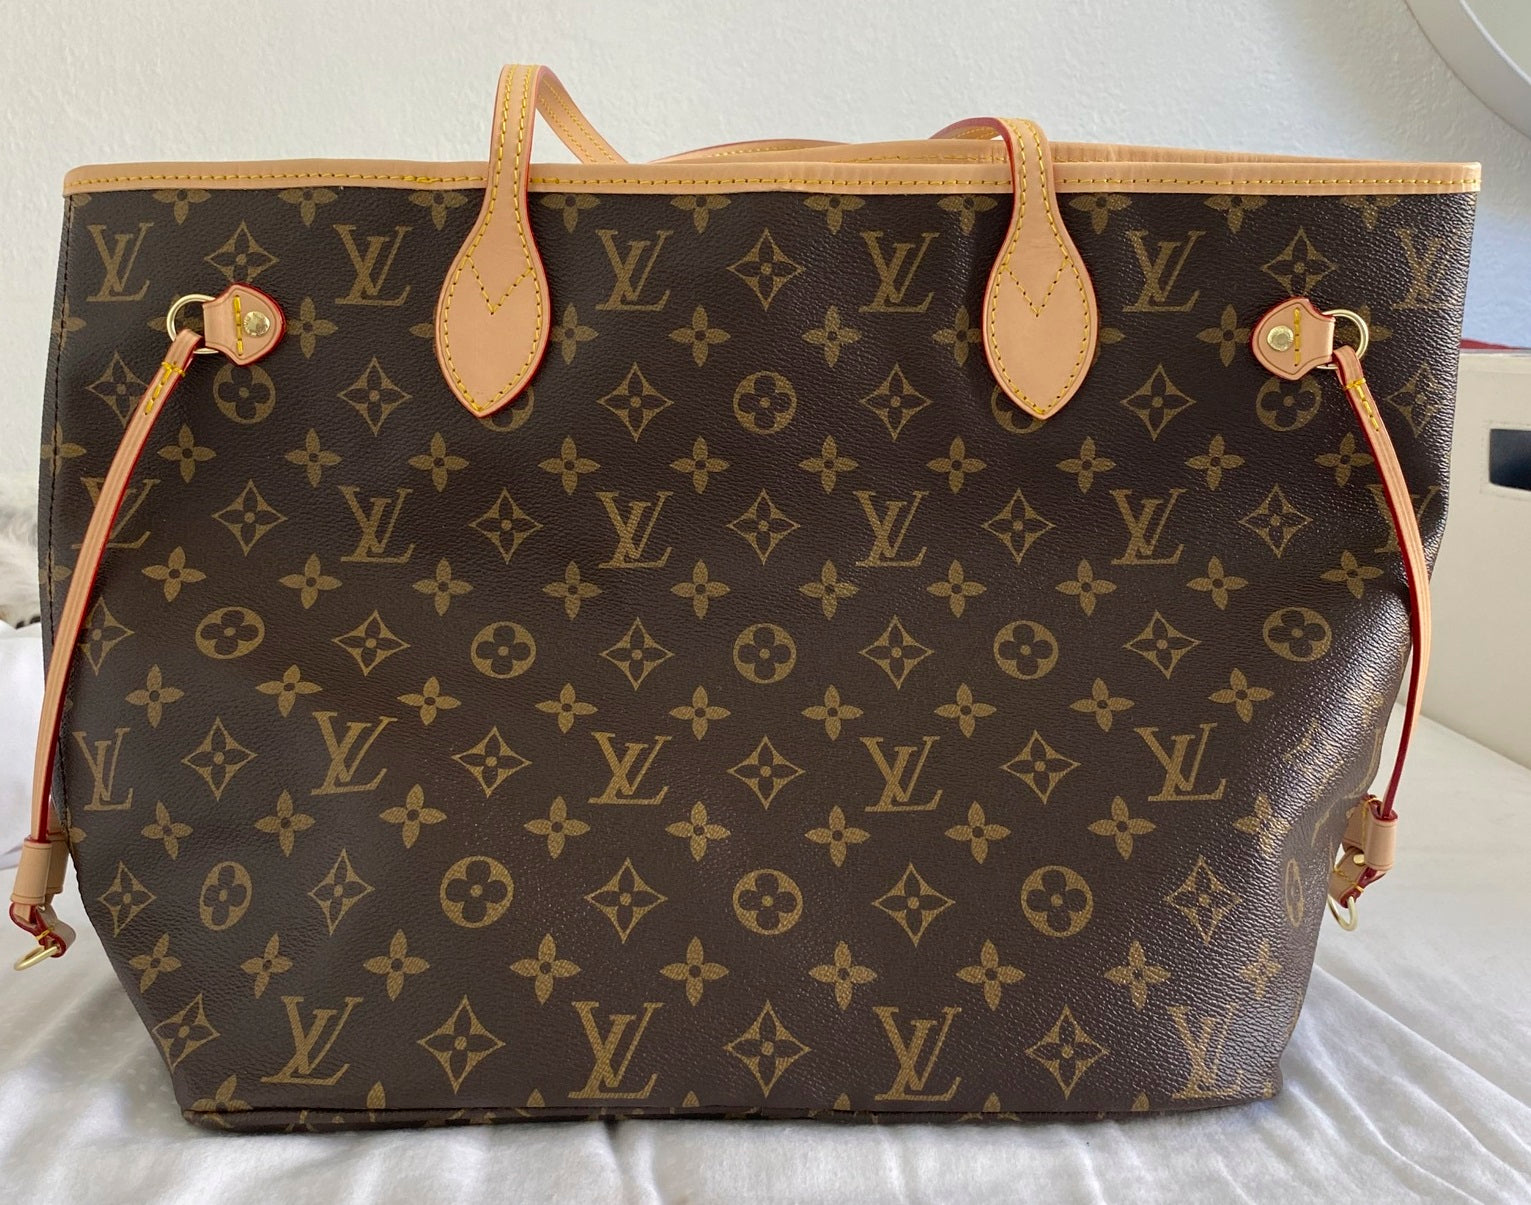 Fake Louis Vuitton Neverfull vs Real: Important Details You Should Definitely Pay Attention To (With Photo Examples) Neverfull Monogram overall view